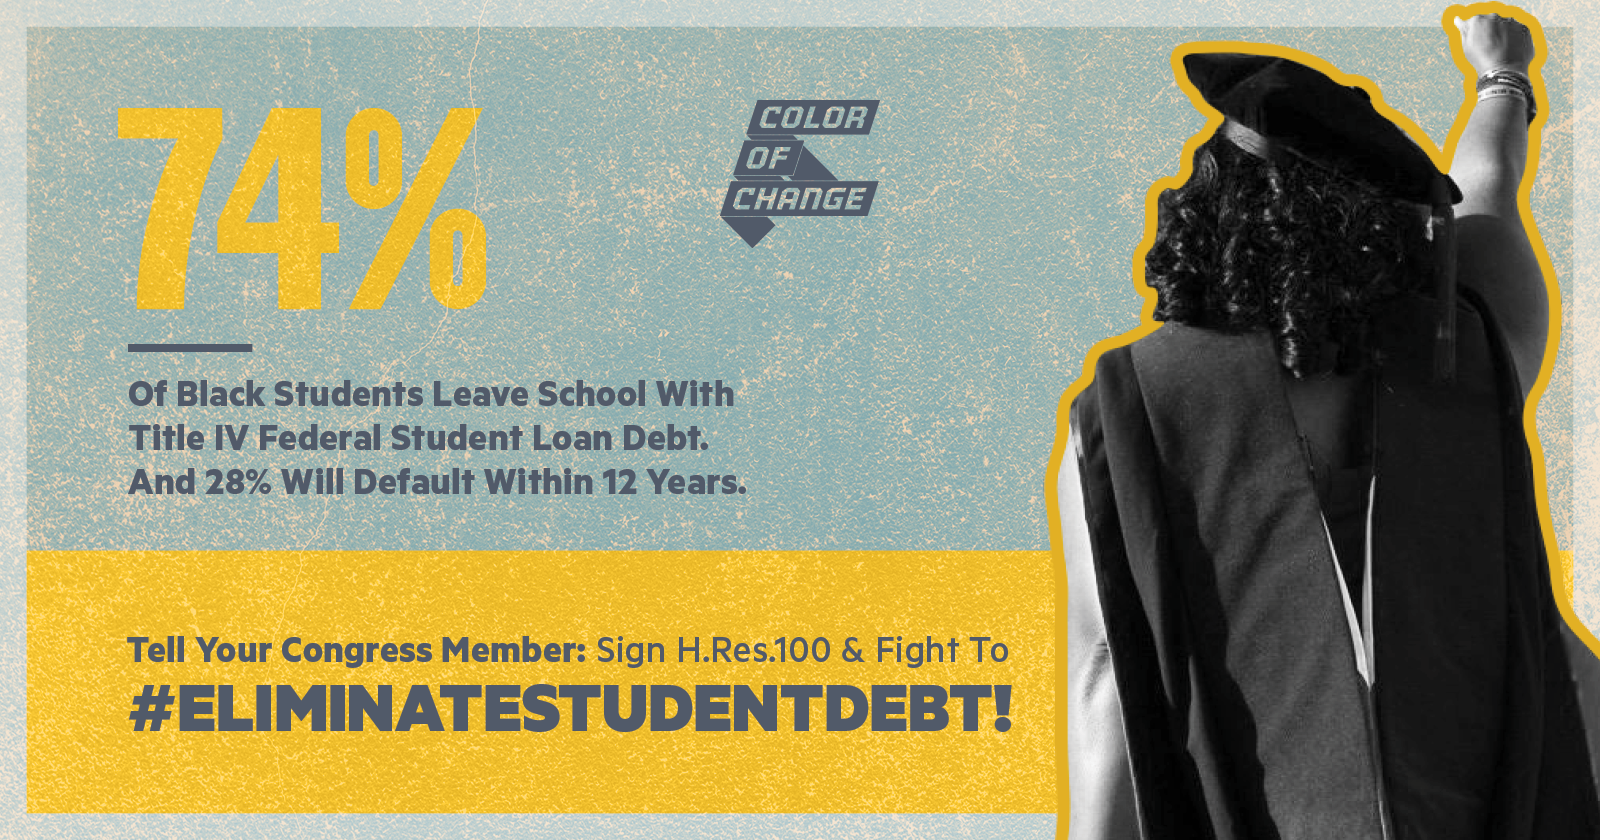 Light blue background with yellow and dark blue text that reads: “74% of Black Students Leave School with Title IV Federal Student Loan Debt. And 28% Will Default within 12 Years. Tell Your Congress Member: Sign H.Res.100 & Fight to #EliminateStudentDebt!”